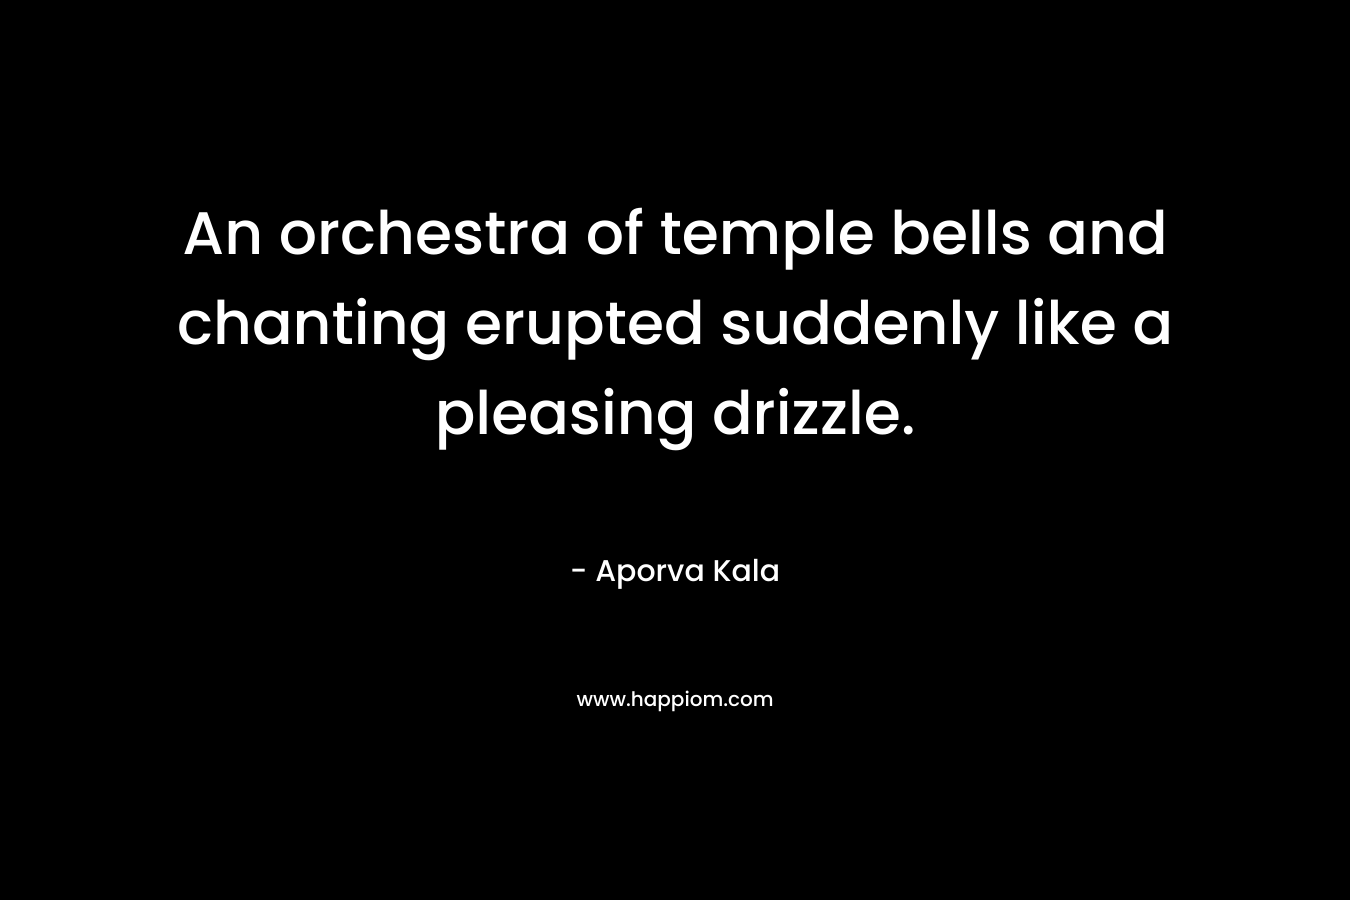 An orchestra of temple bells and chanting erupted suddenly like a pleasing drizzle. – Aporva Kala